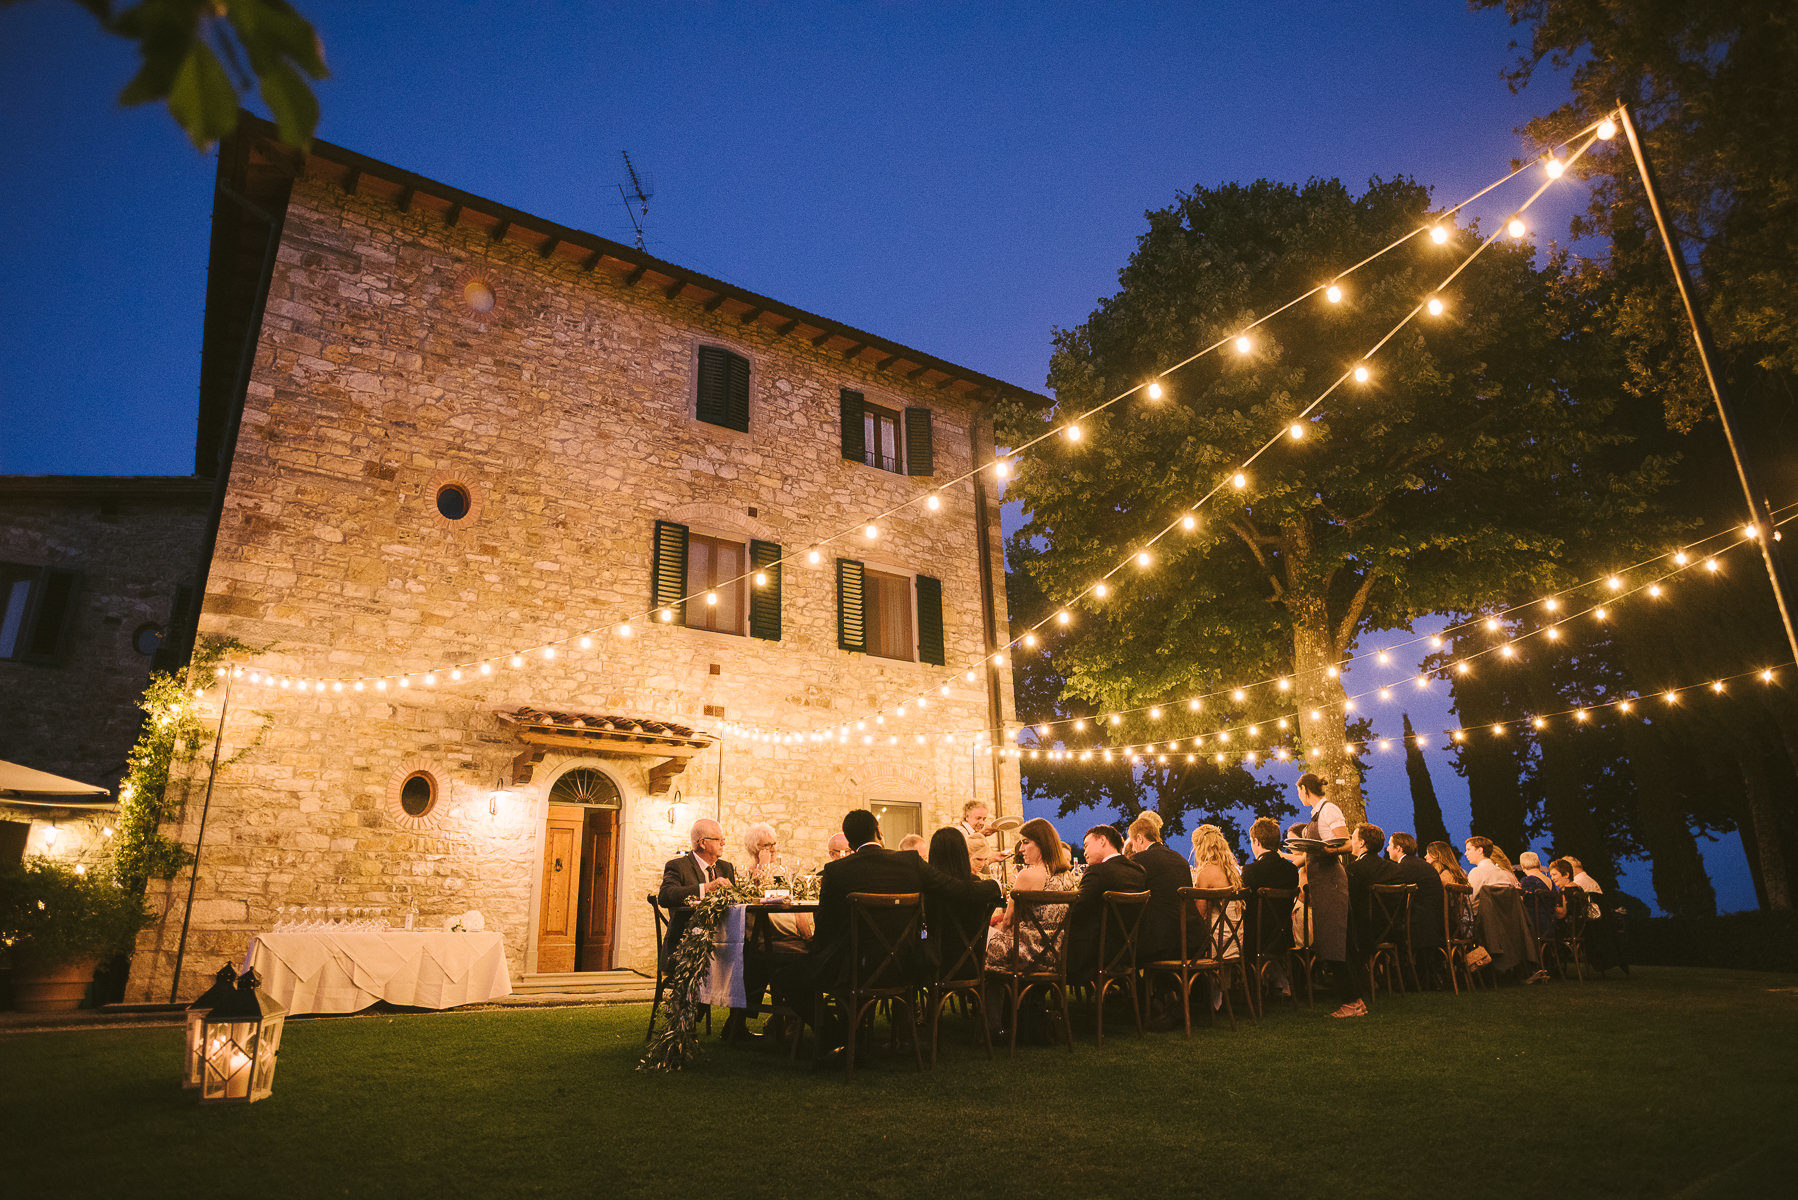 Unforgettable wedding dinner under lovely lights in Tuscany countryside in Chianti near Panzano